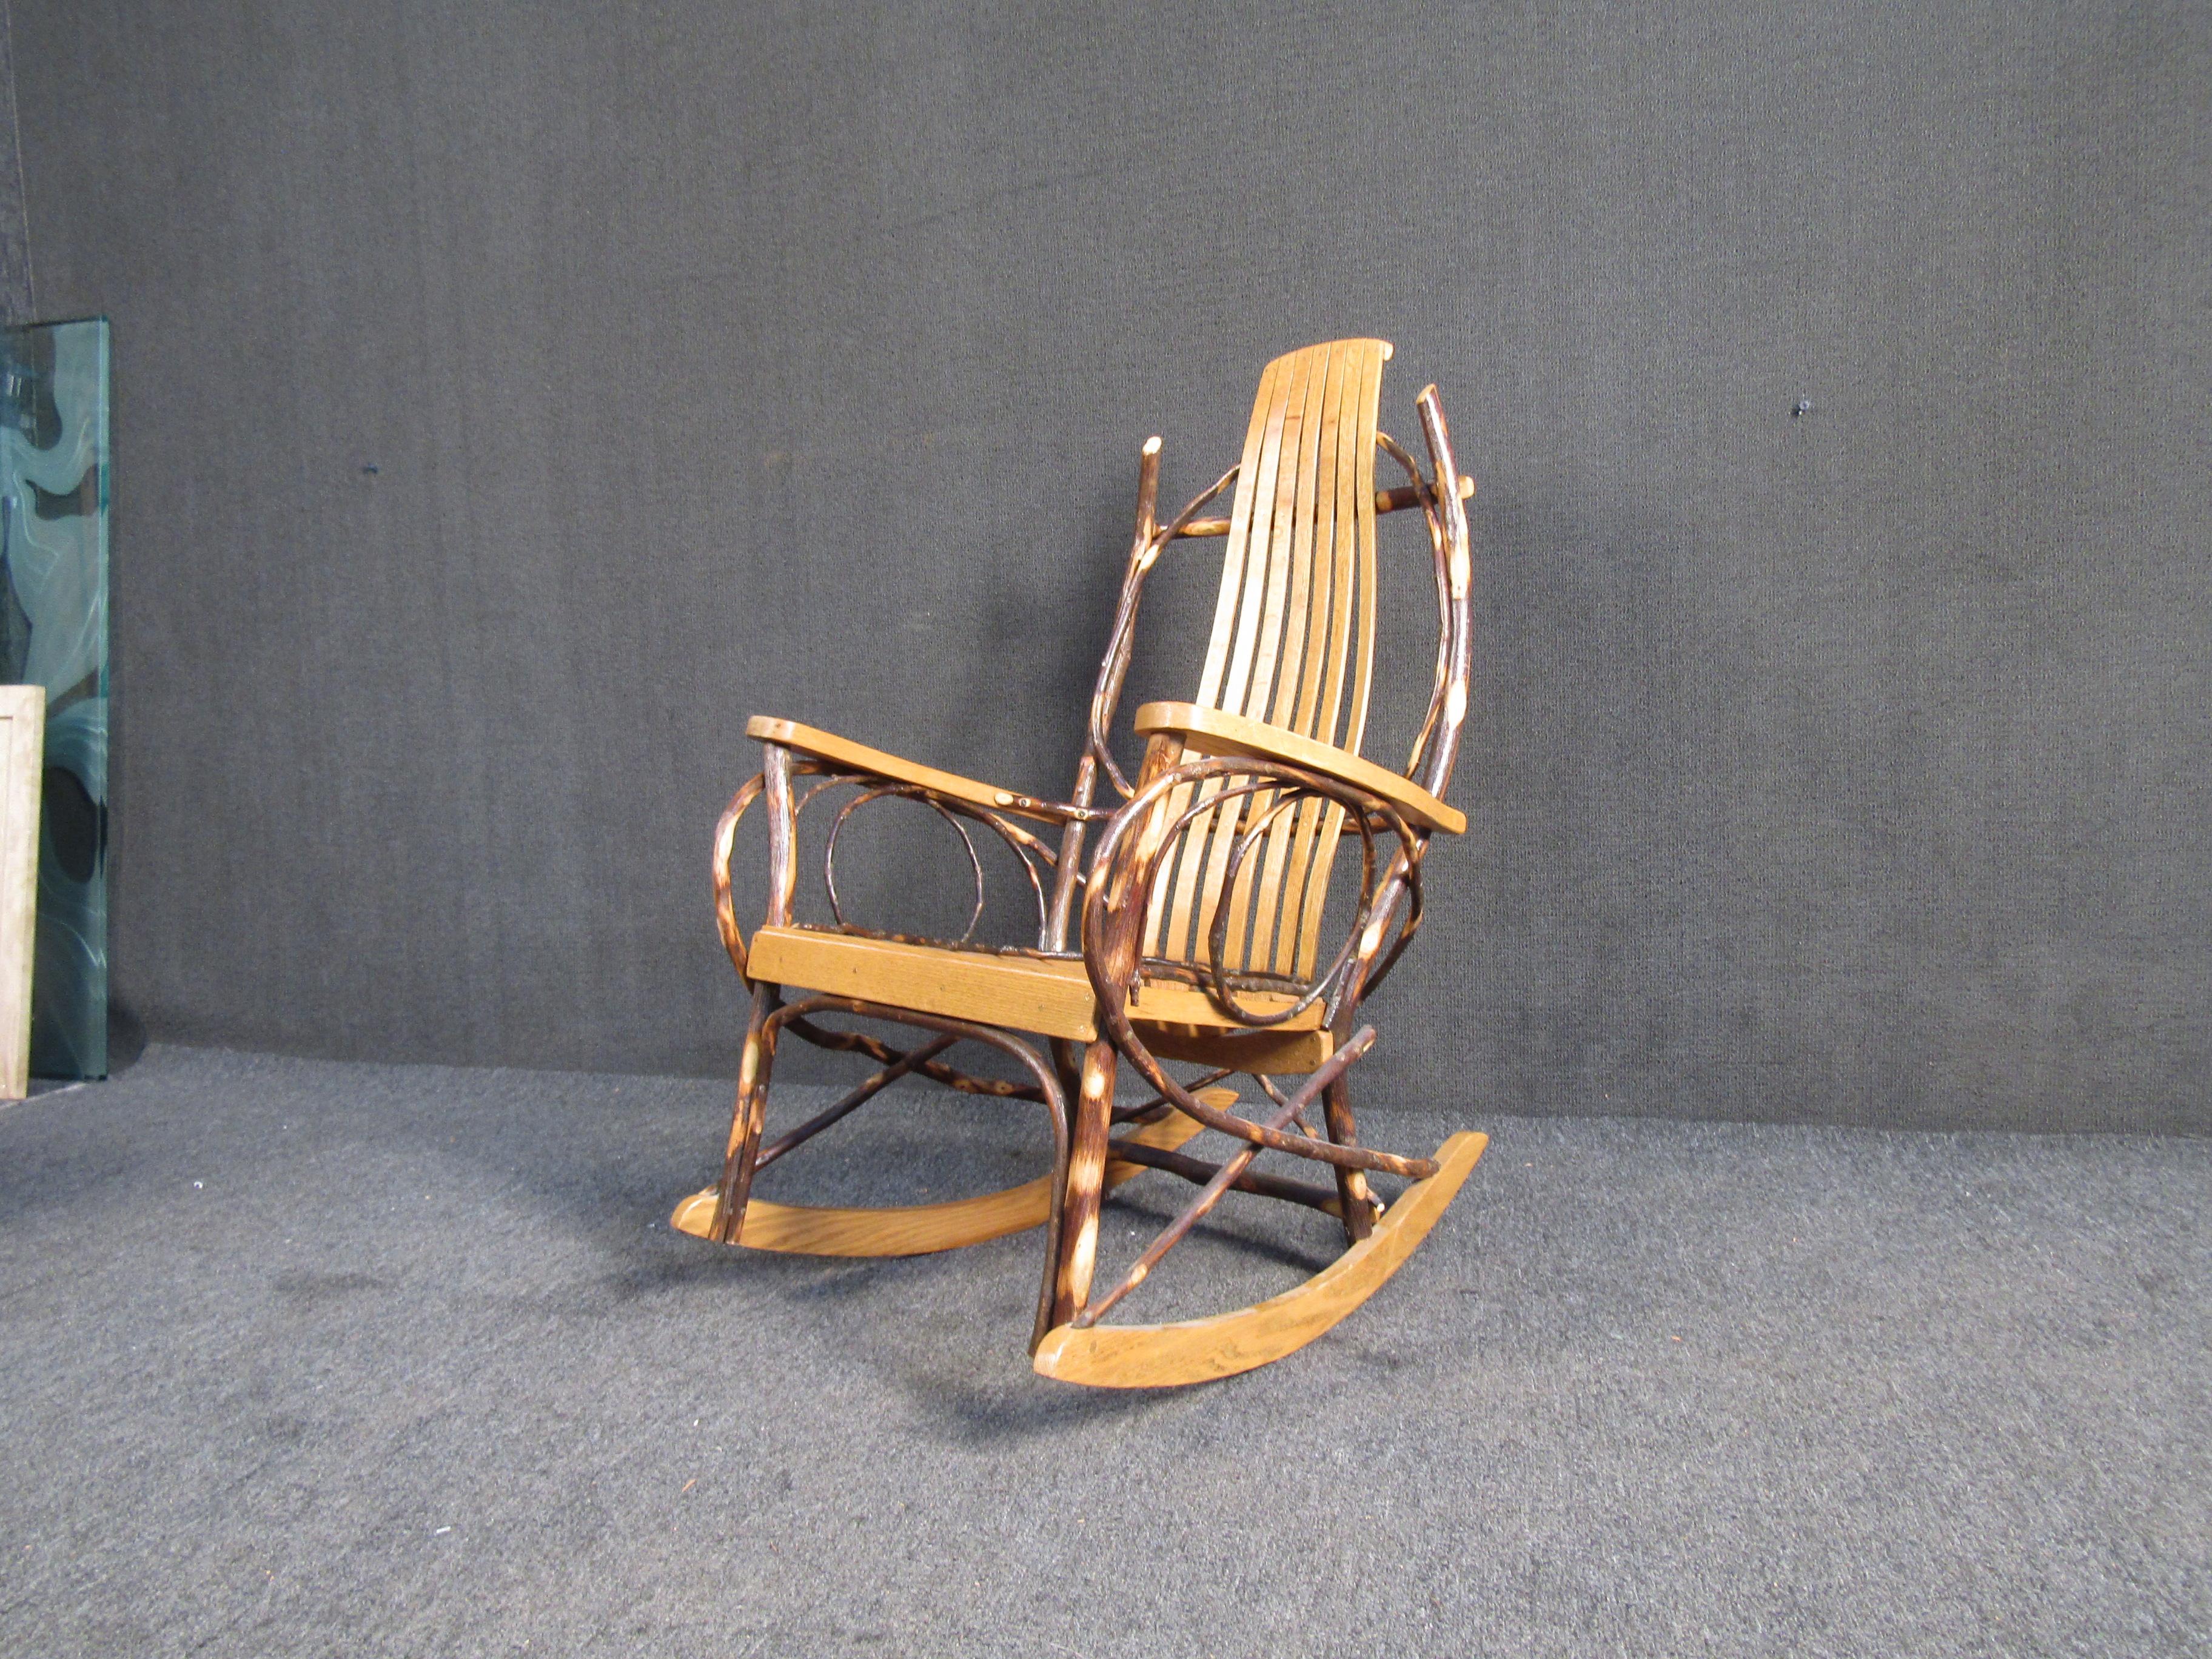 Vintage Bentwood Rocking chair. This unique chair is a perfect conversation piece for any living room or lounge space.

Please confirm the item location (NY or NJ).